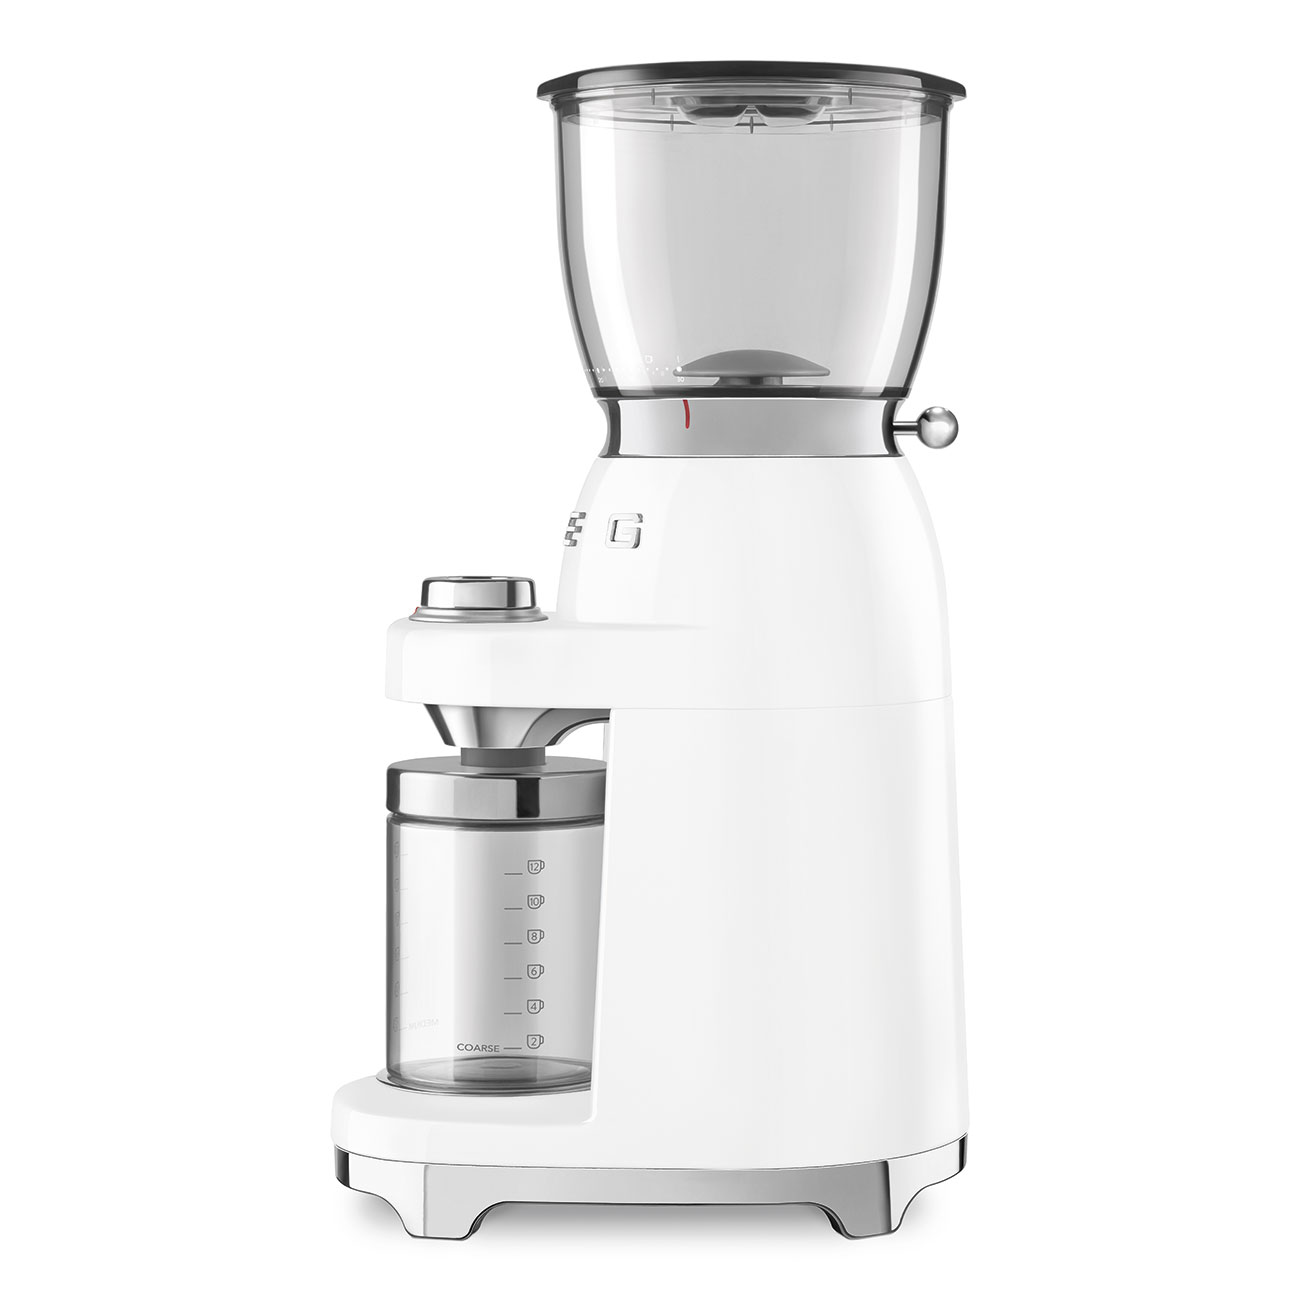 White Coffee Grinder featuring a conical burr - CGF11WHUK - Smeg_7